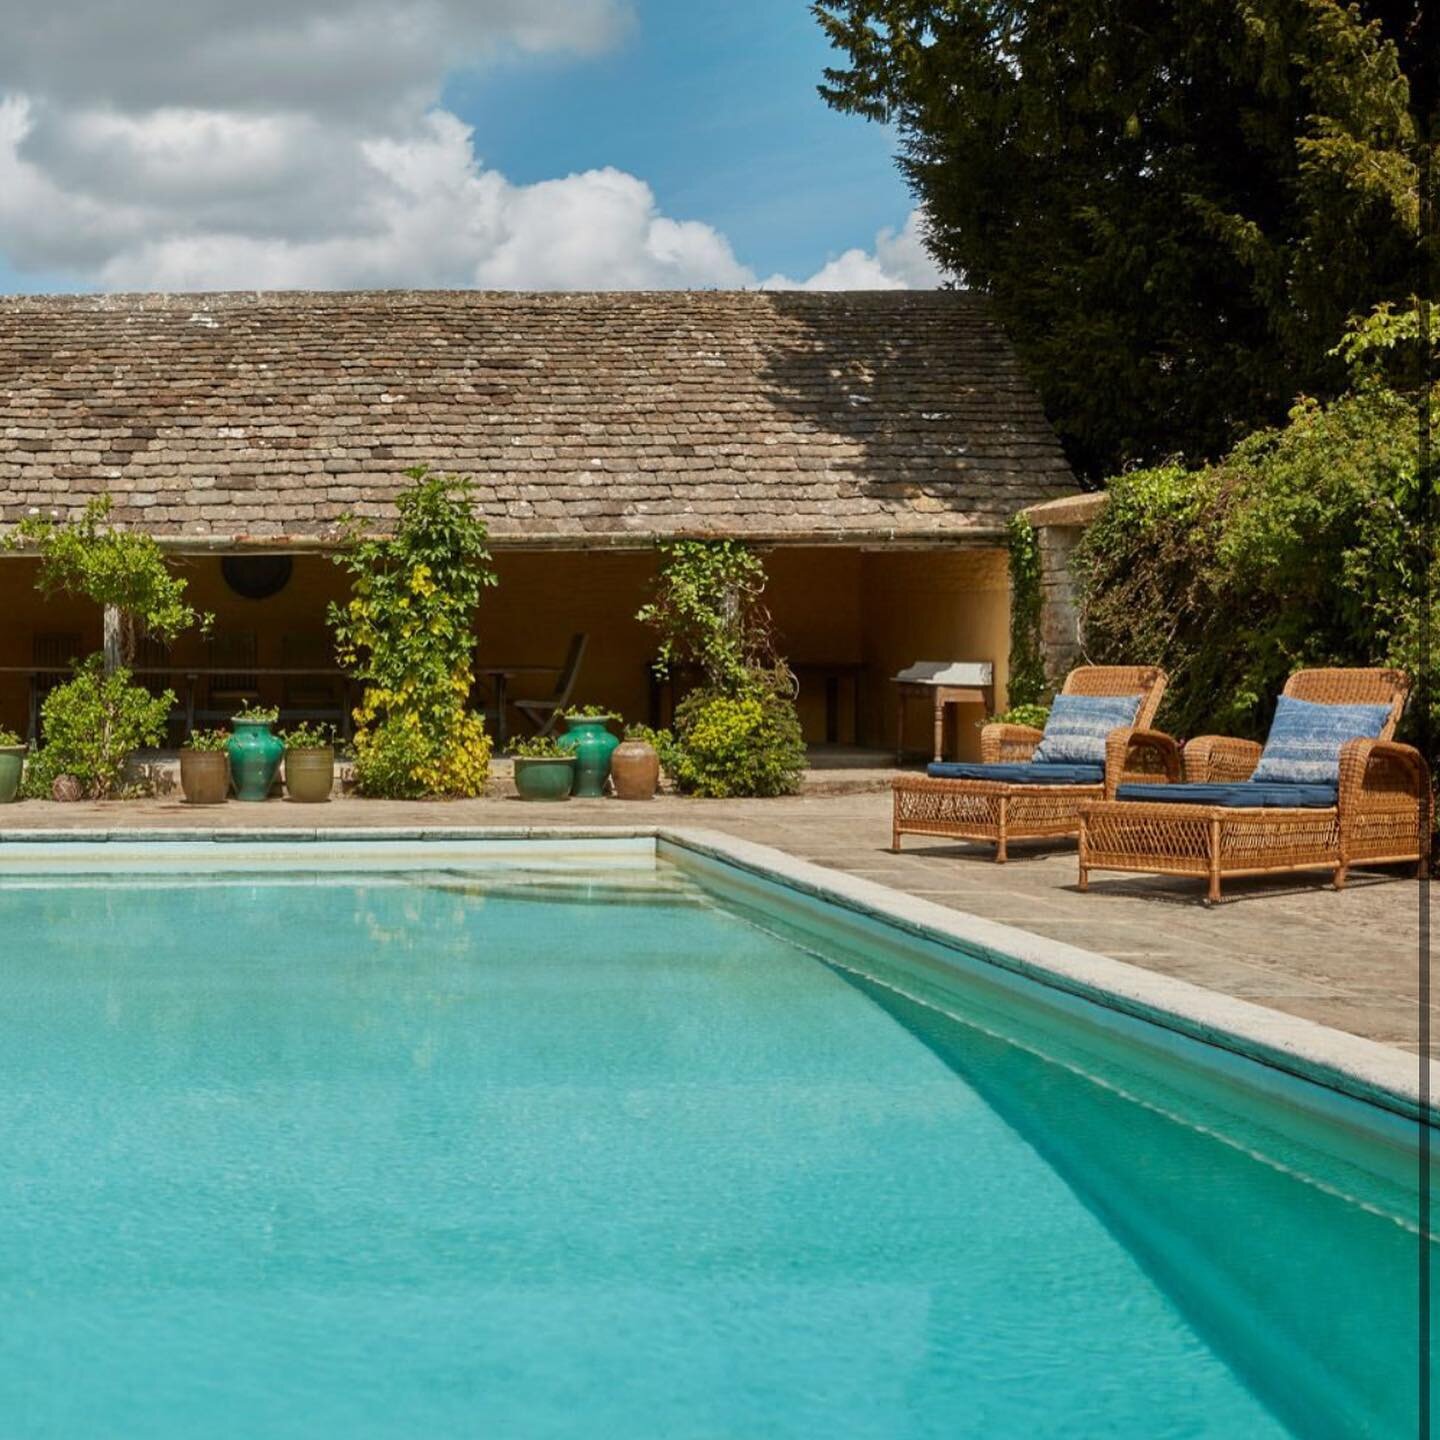 Availability this Summer in the Cotswolds

An extended former Victorian Hunting Lodge with large, tranquil gardens. The rear of the house faces south-west and is the perfect spot for a sundowner after a day filled with fresh-air and good company. The